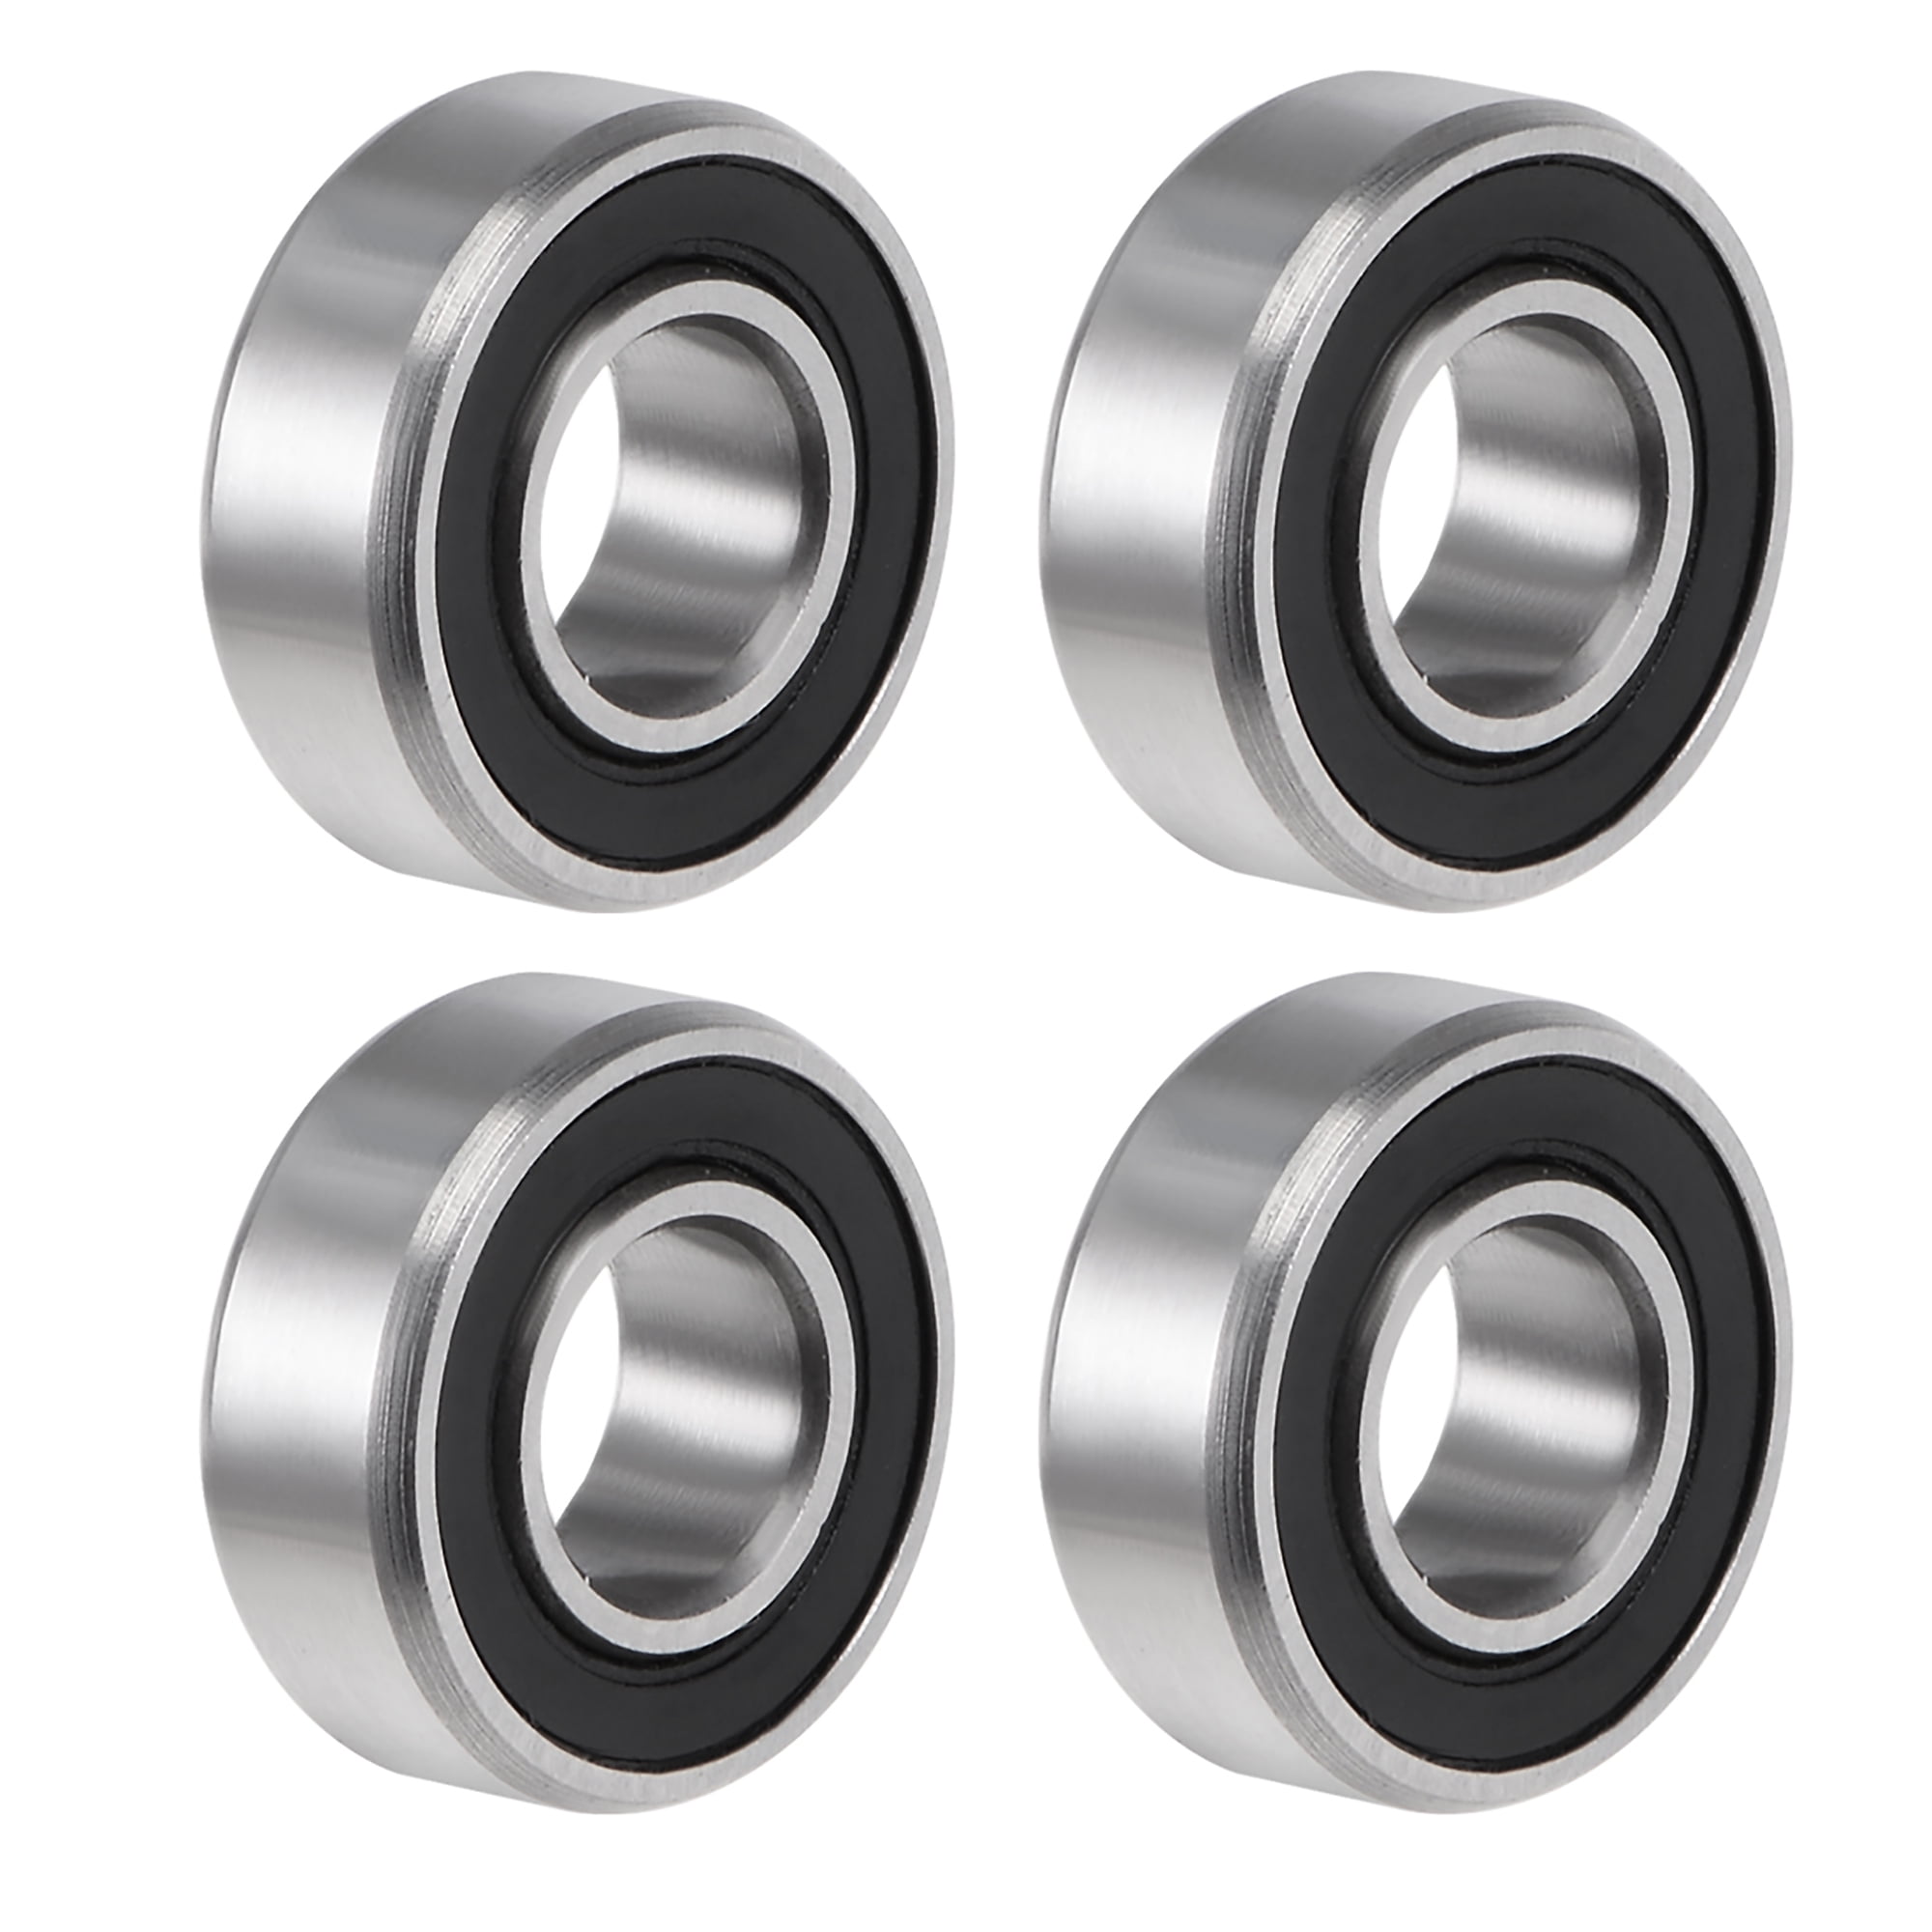 uxcell® MR128-2RS Deep Groove Ball Bearing 8x12x3.5mm Double Sealed ABEC-3 Bearings 4-Pack